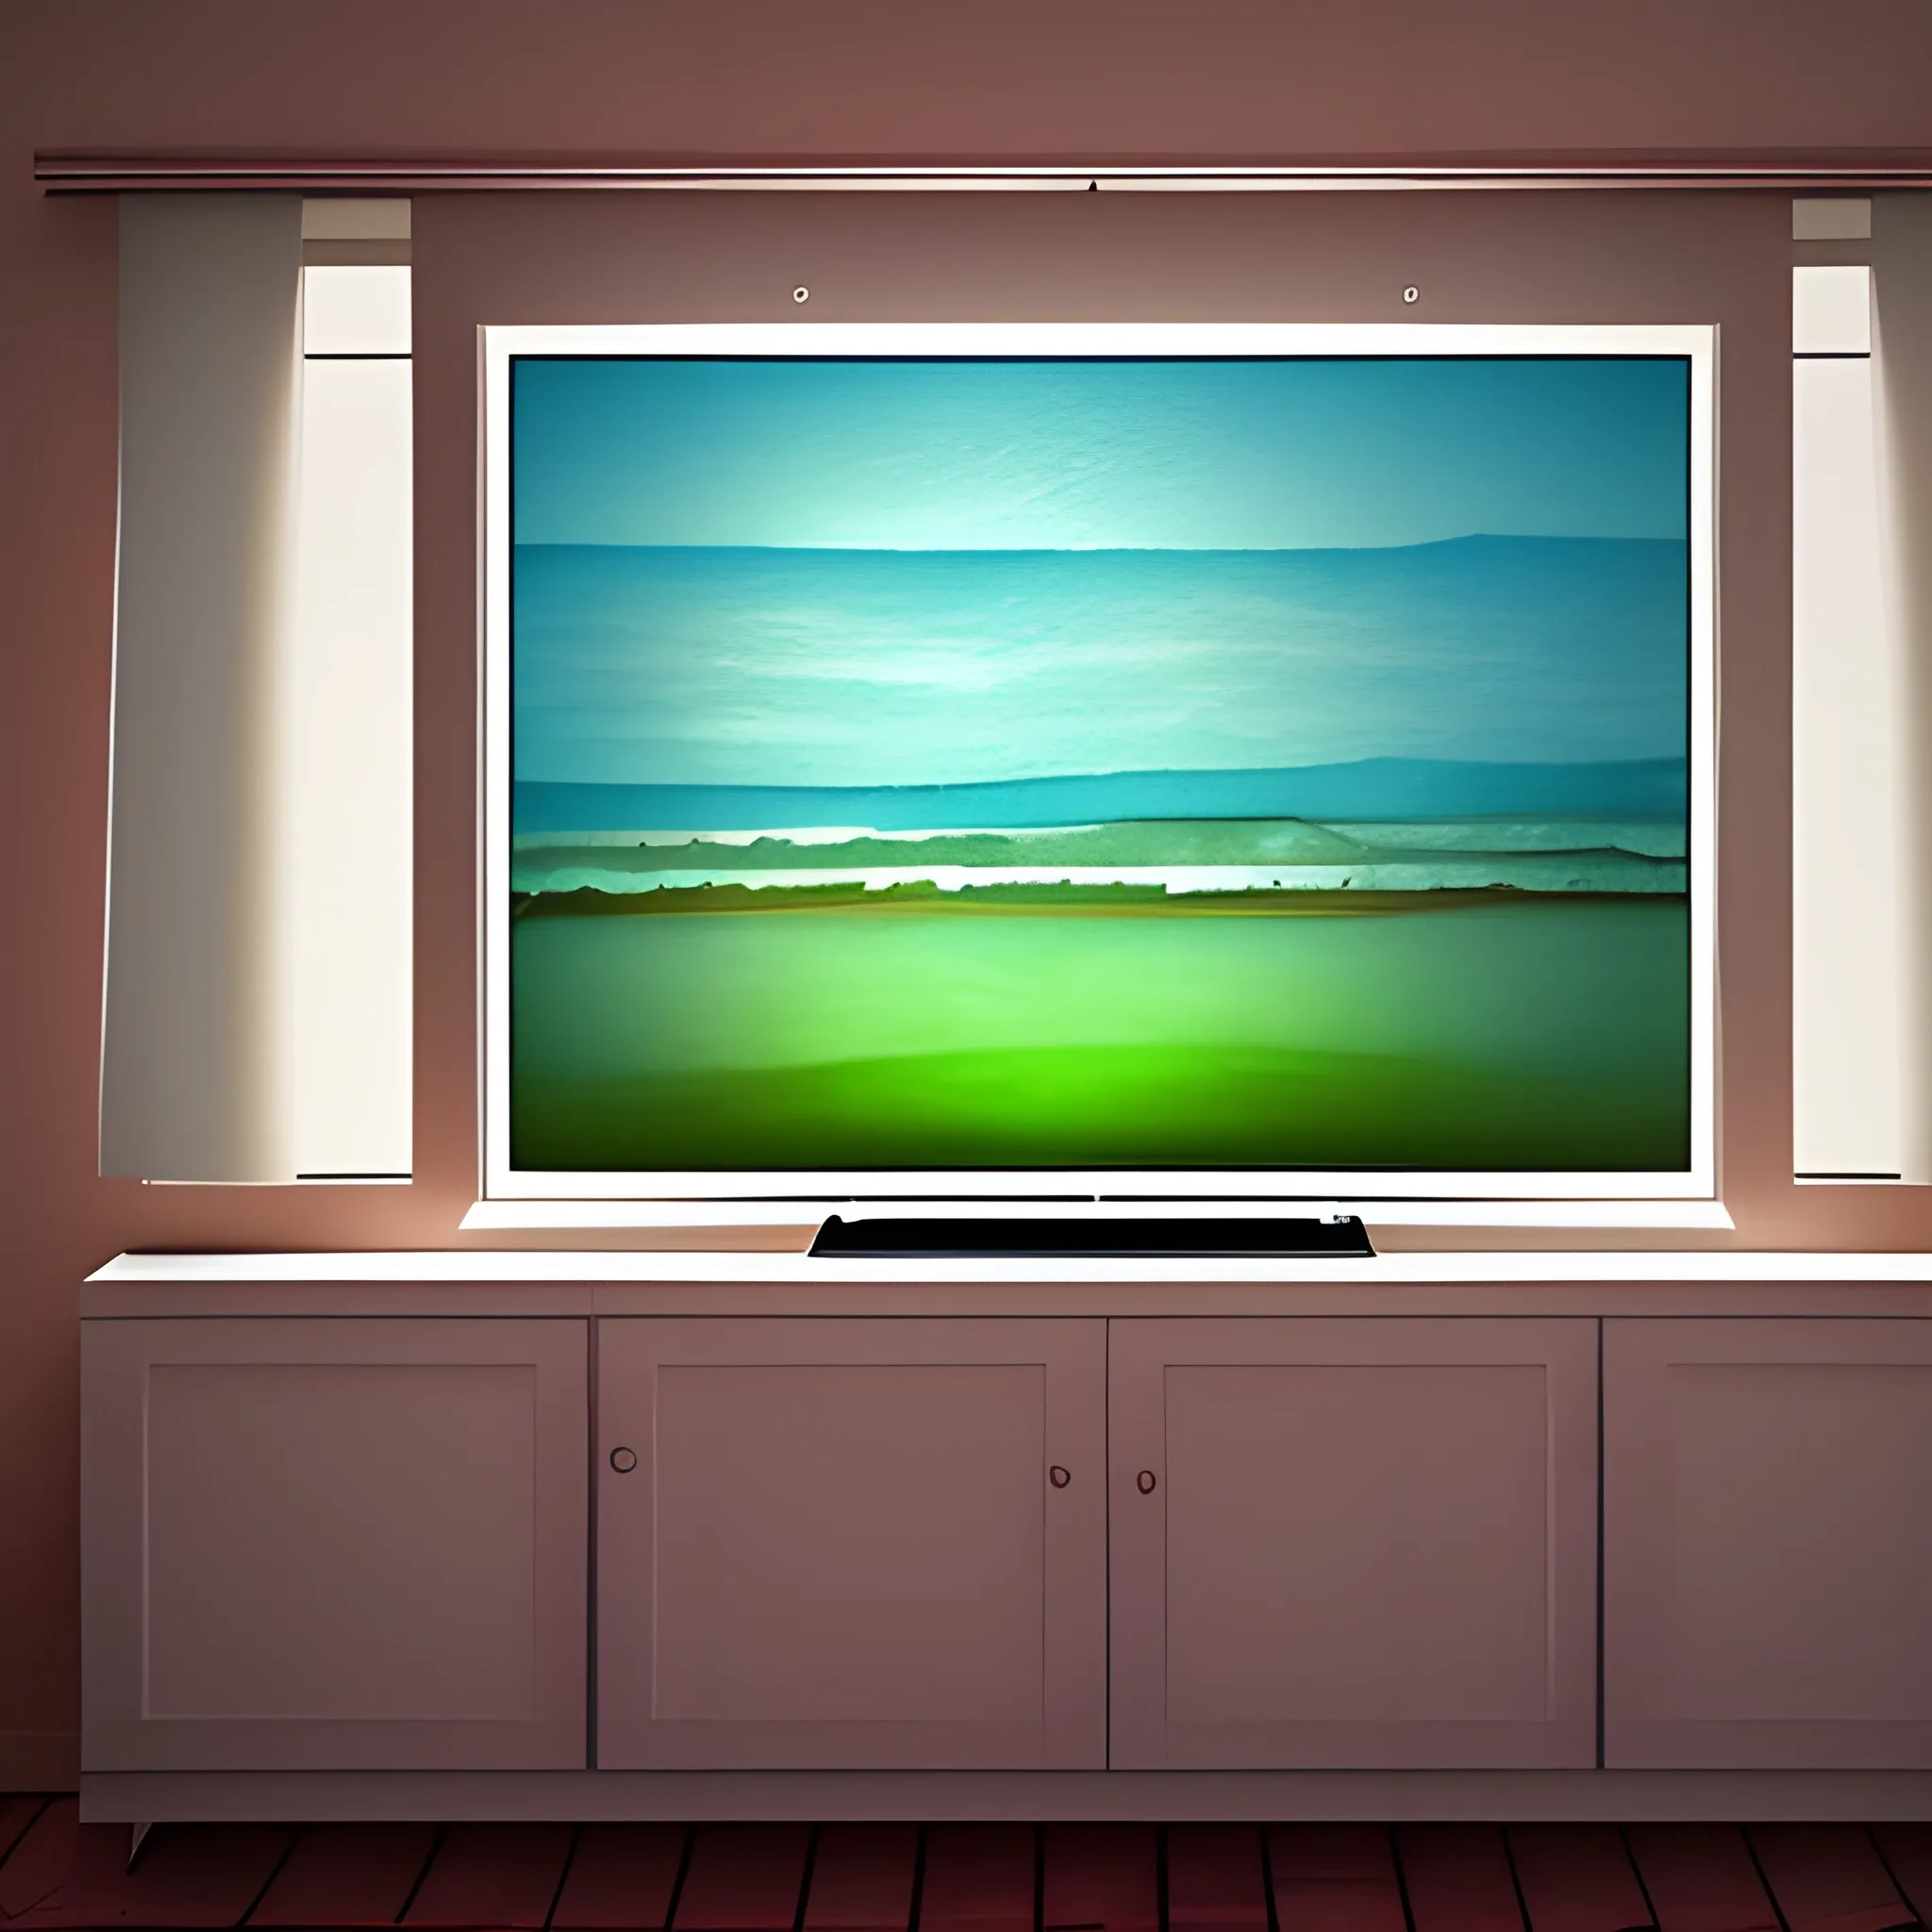 A TV in a room where the room has a window behind the TV, Water Color, 3D